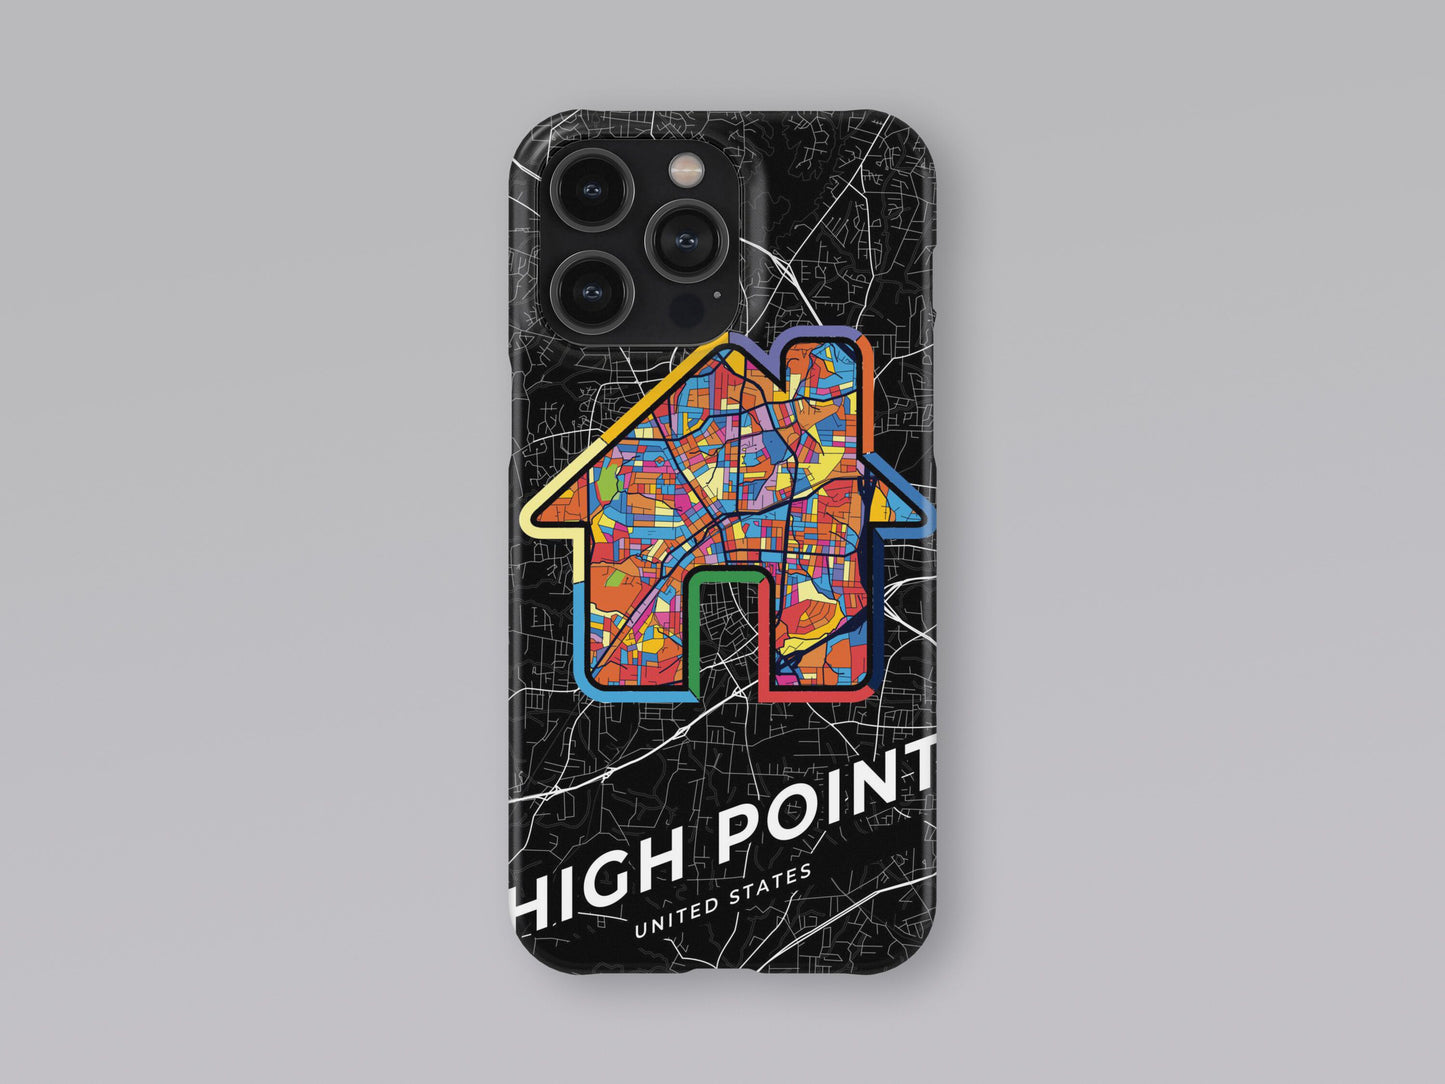 High Point North Carolina slim phone case with colorful icon. Birthday, wedding or housewarming gift. Couple match cases. 3